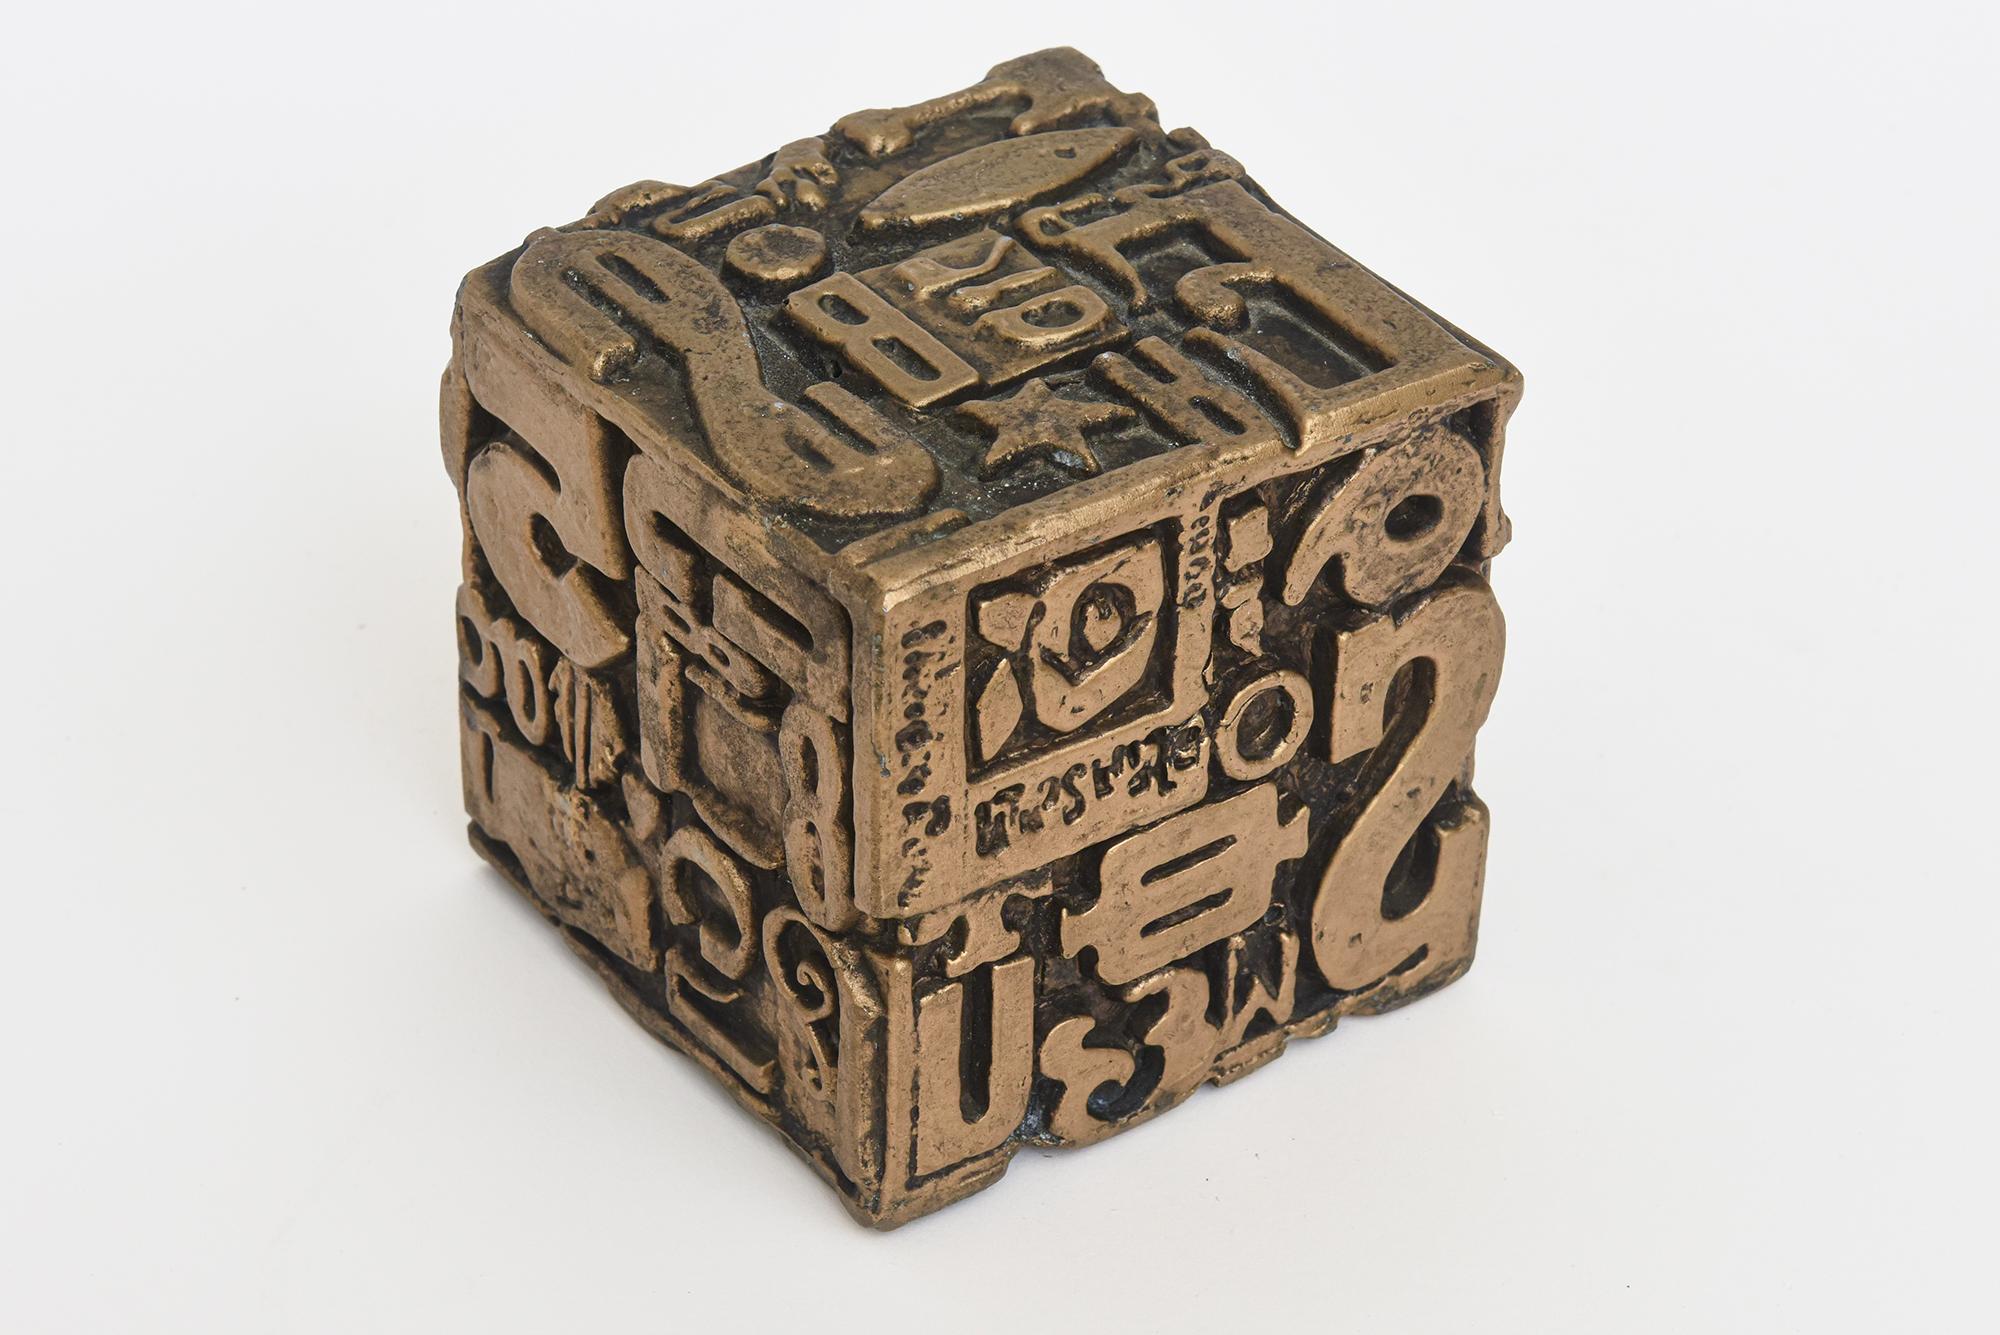 Vintage Sheldon Rose Alpha Typographic Cube Sculpture Mixed Media In Good Condition For Sale In North Miami, FL